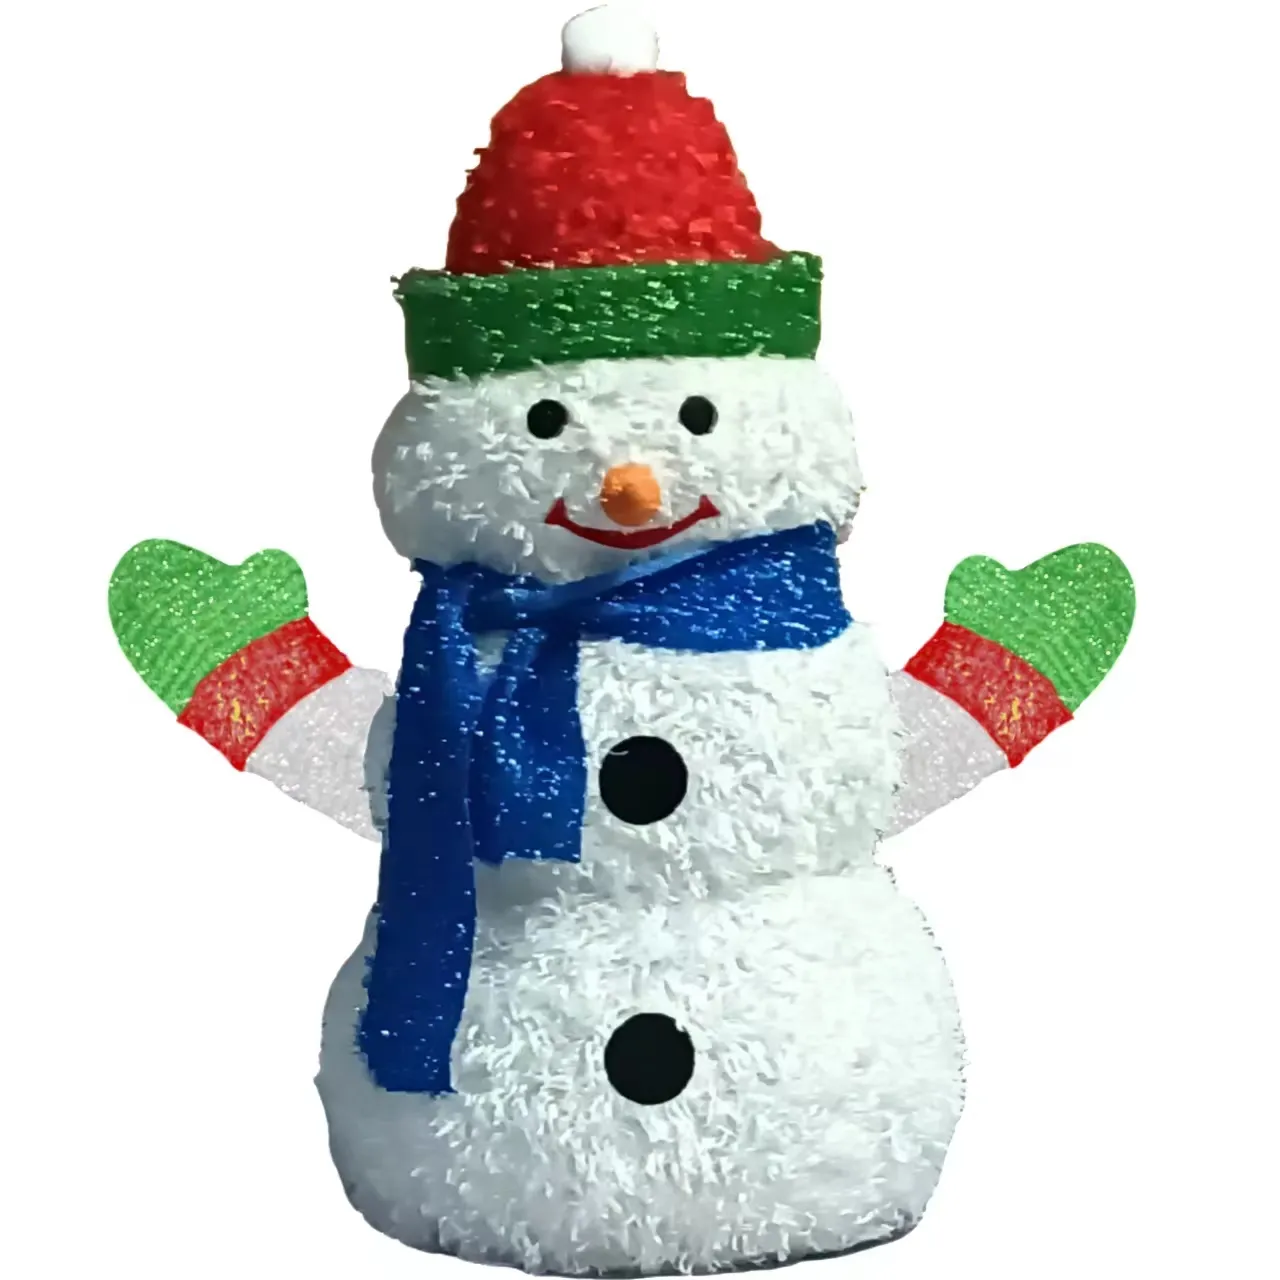 24" USB Eight Function Timing Remote Control 33 pcs LED Light Chrysanthemum Flannel Snowman